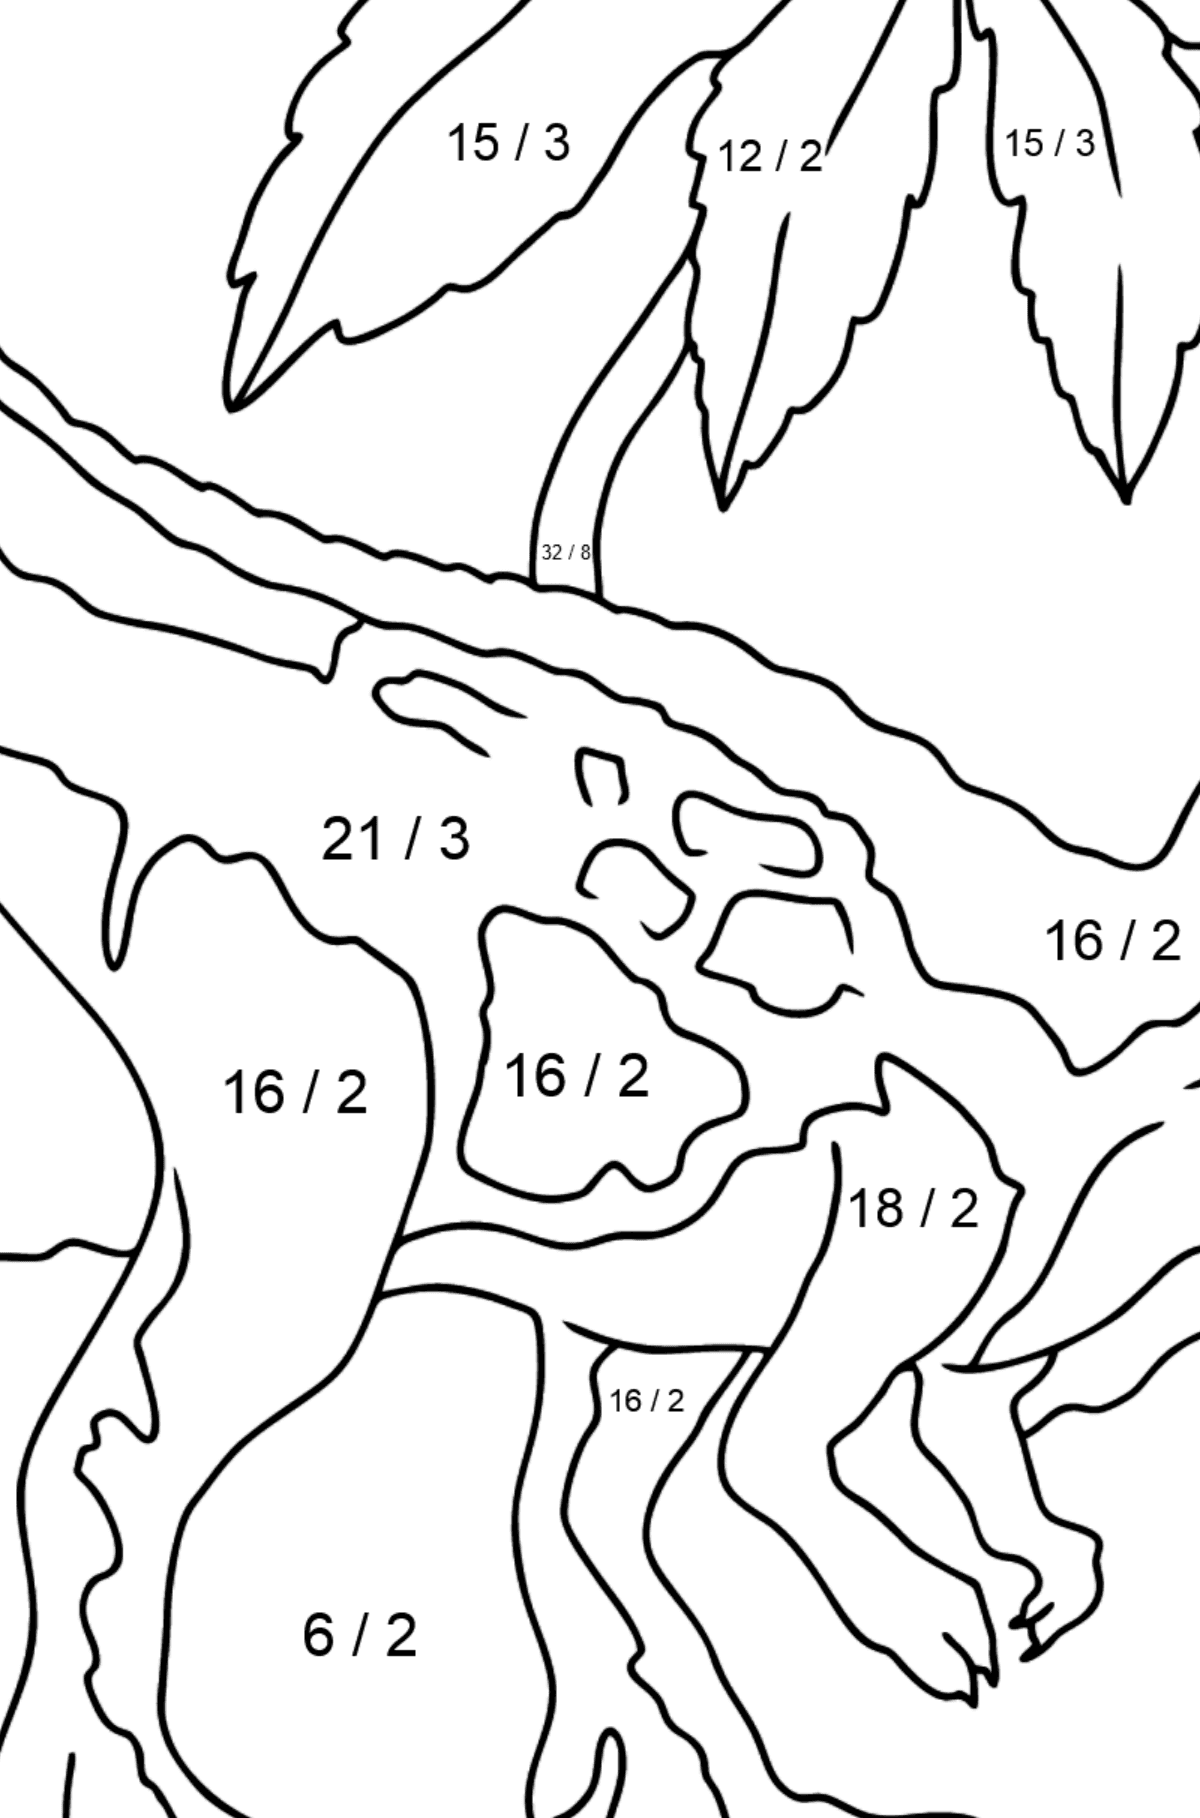 Coloring Page - Tyrannosaurus - A Terrestrial Predator - Math Coloring - Division for Kids